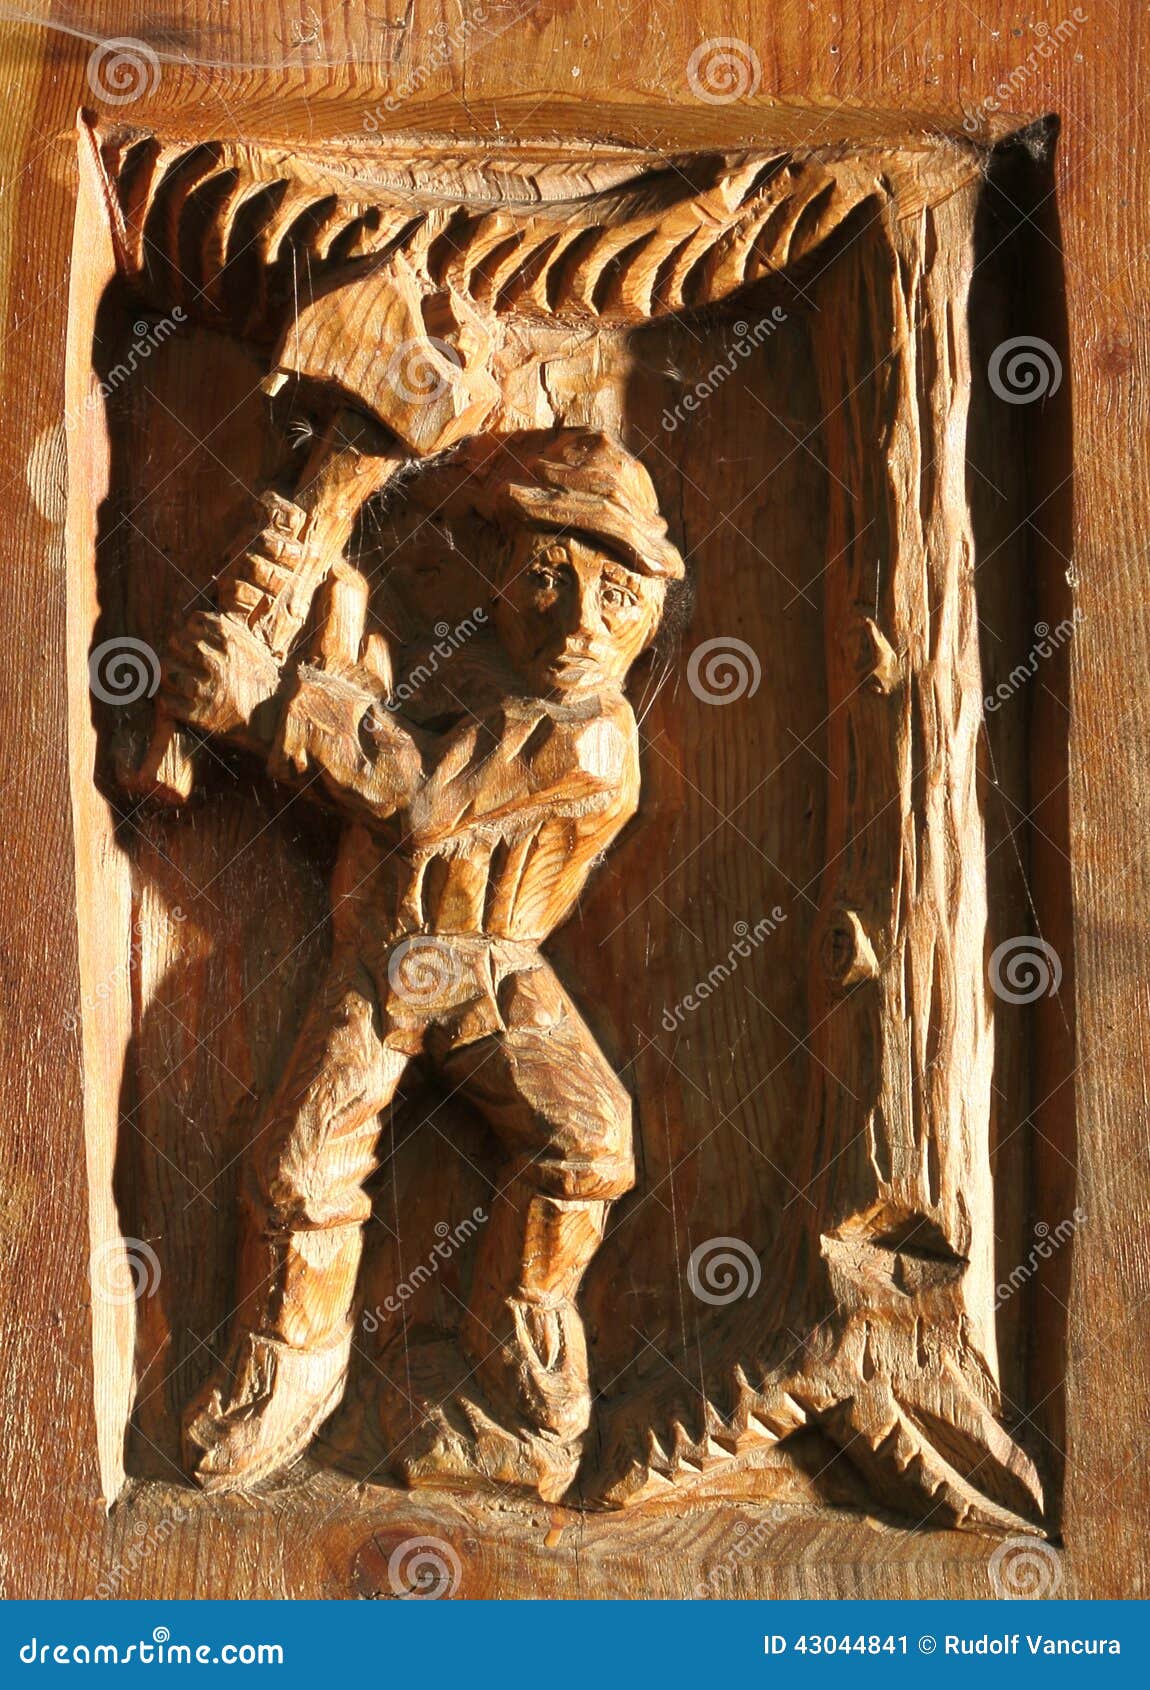 woodcarving of man chopping tree